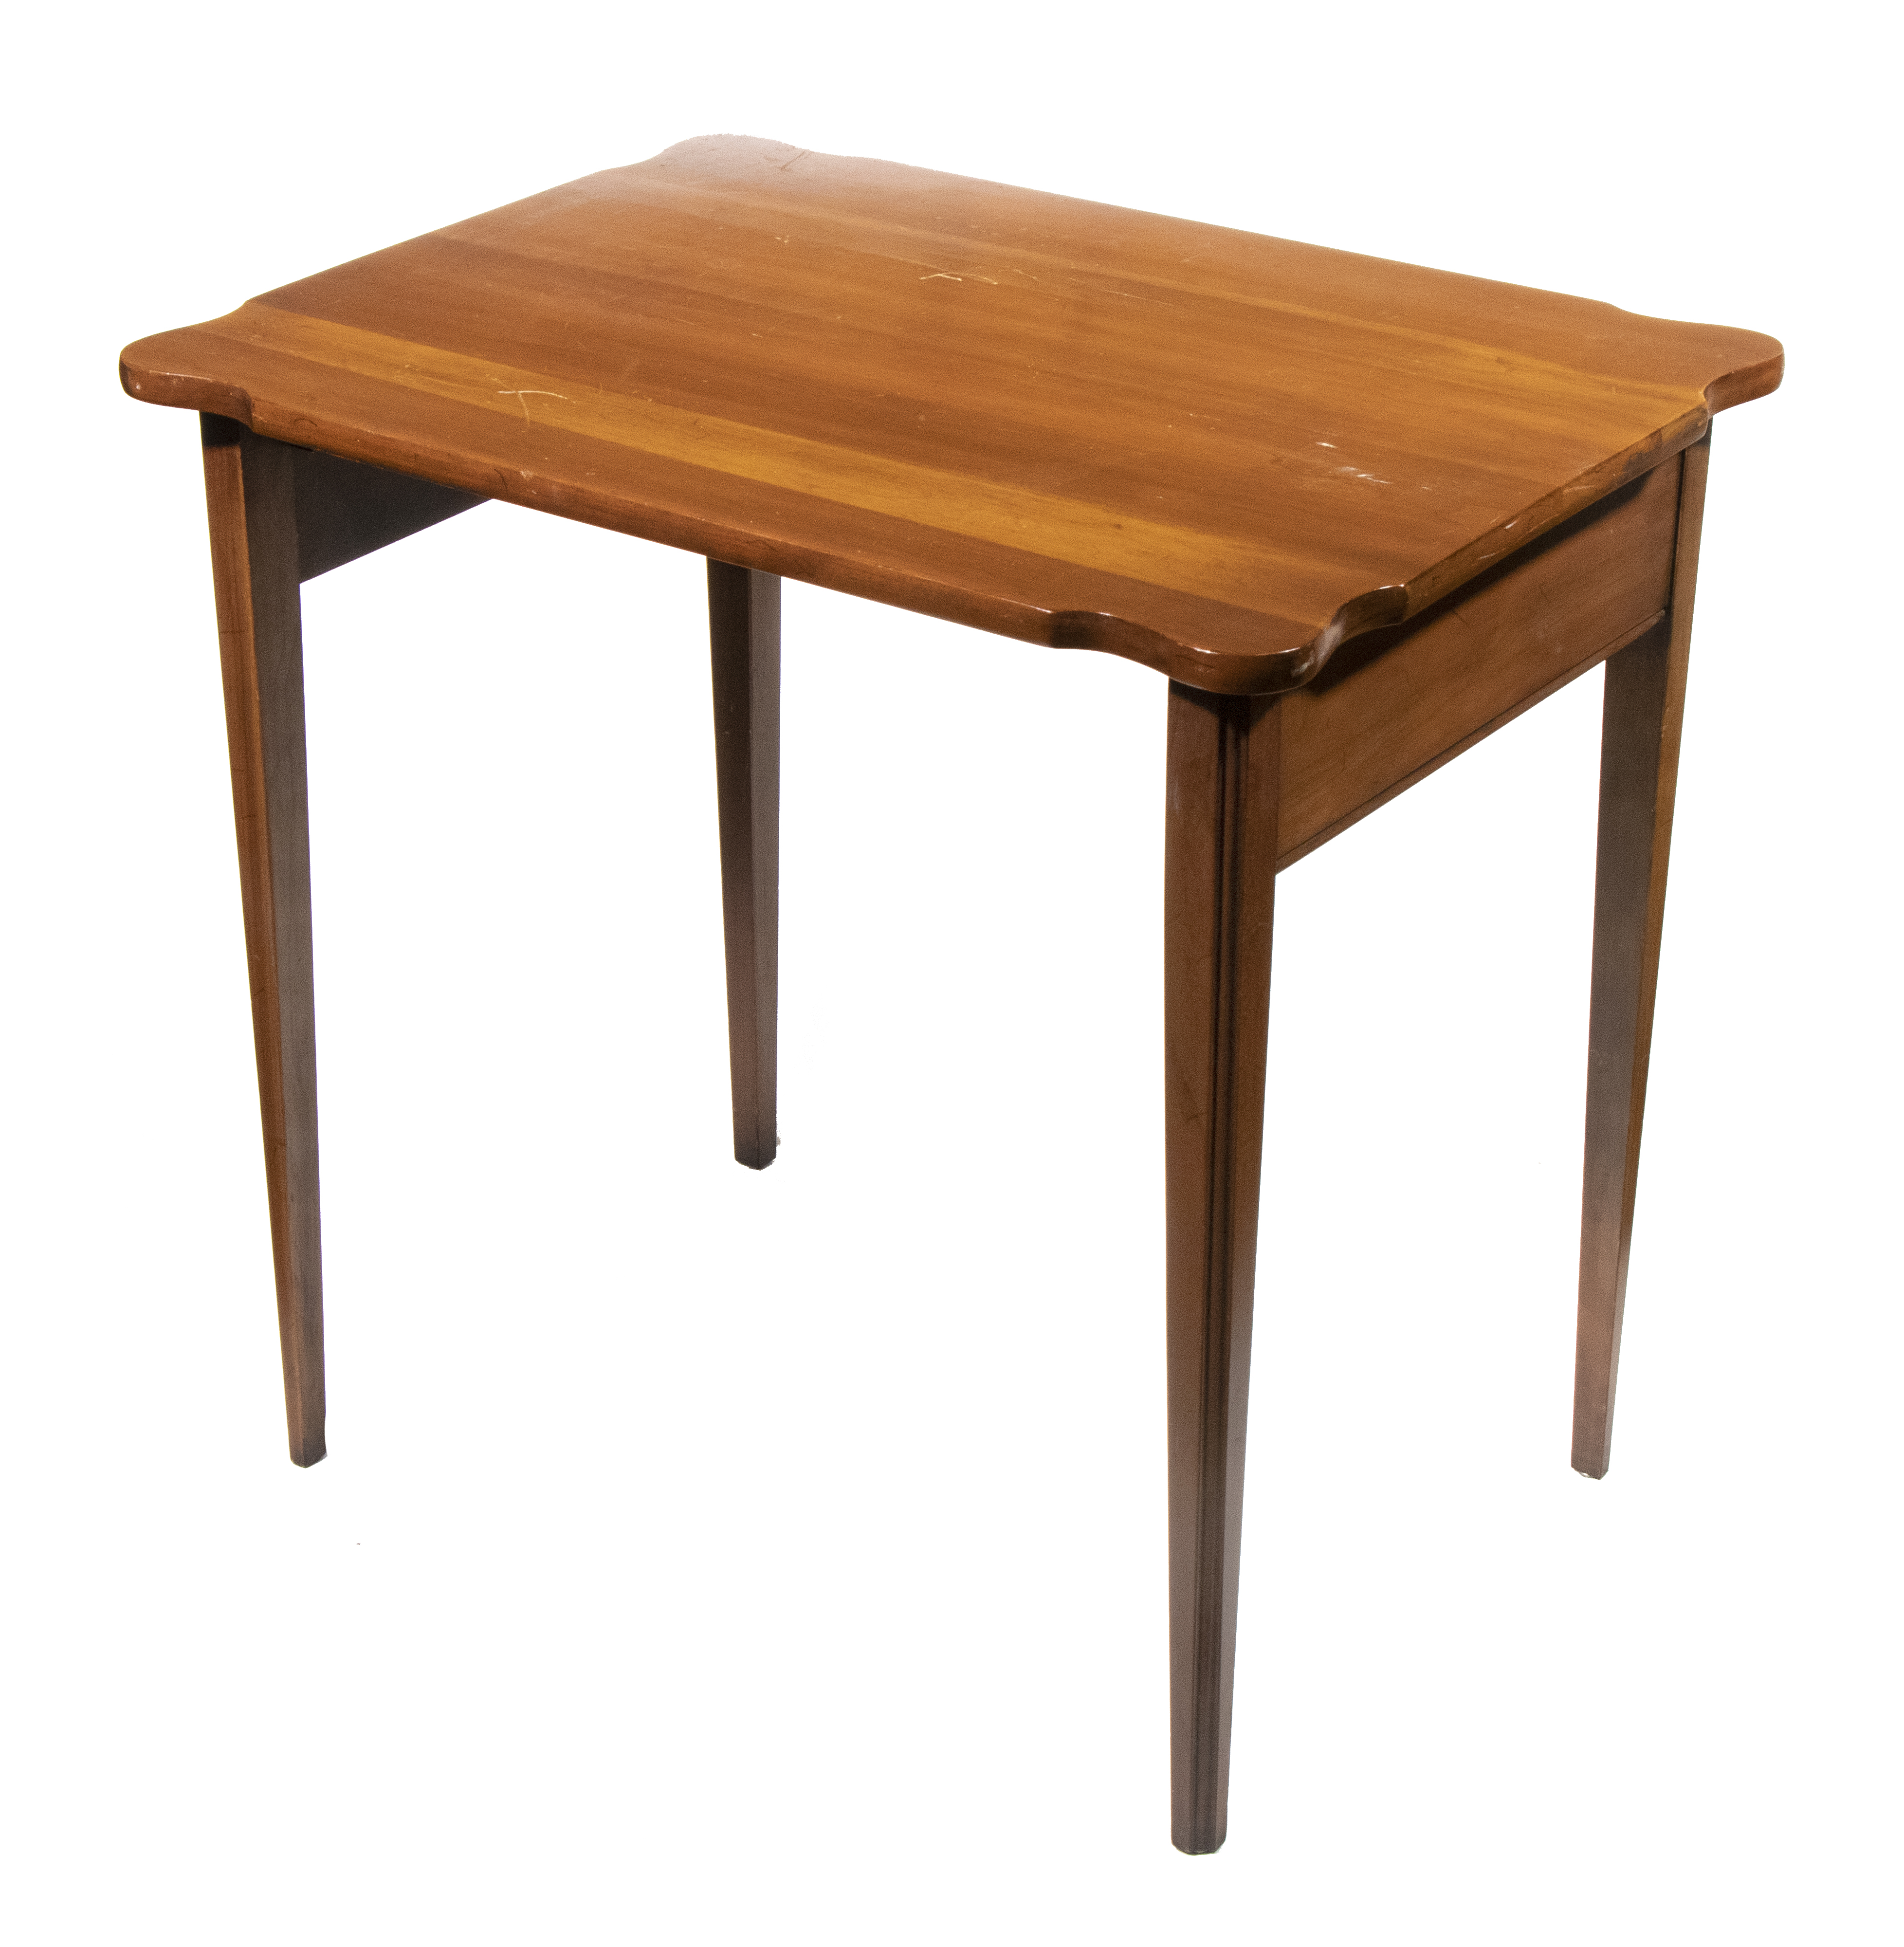 SIDE TABLE Contemporary Shaped Top Hardwood